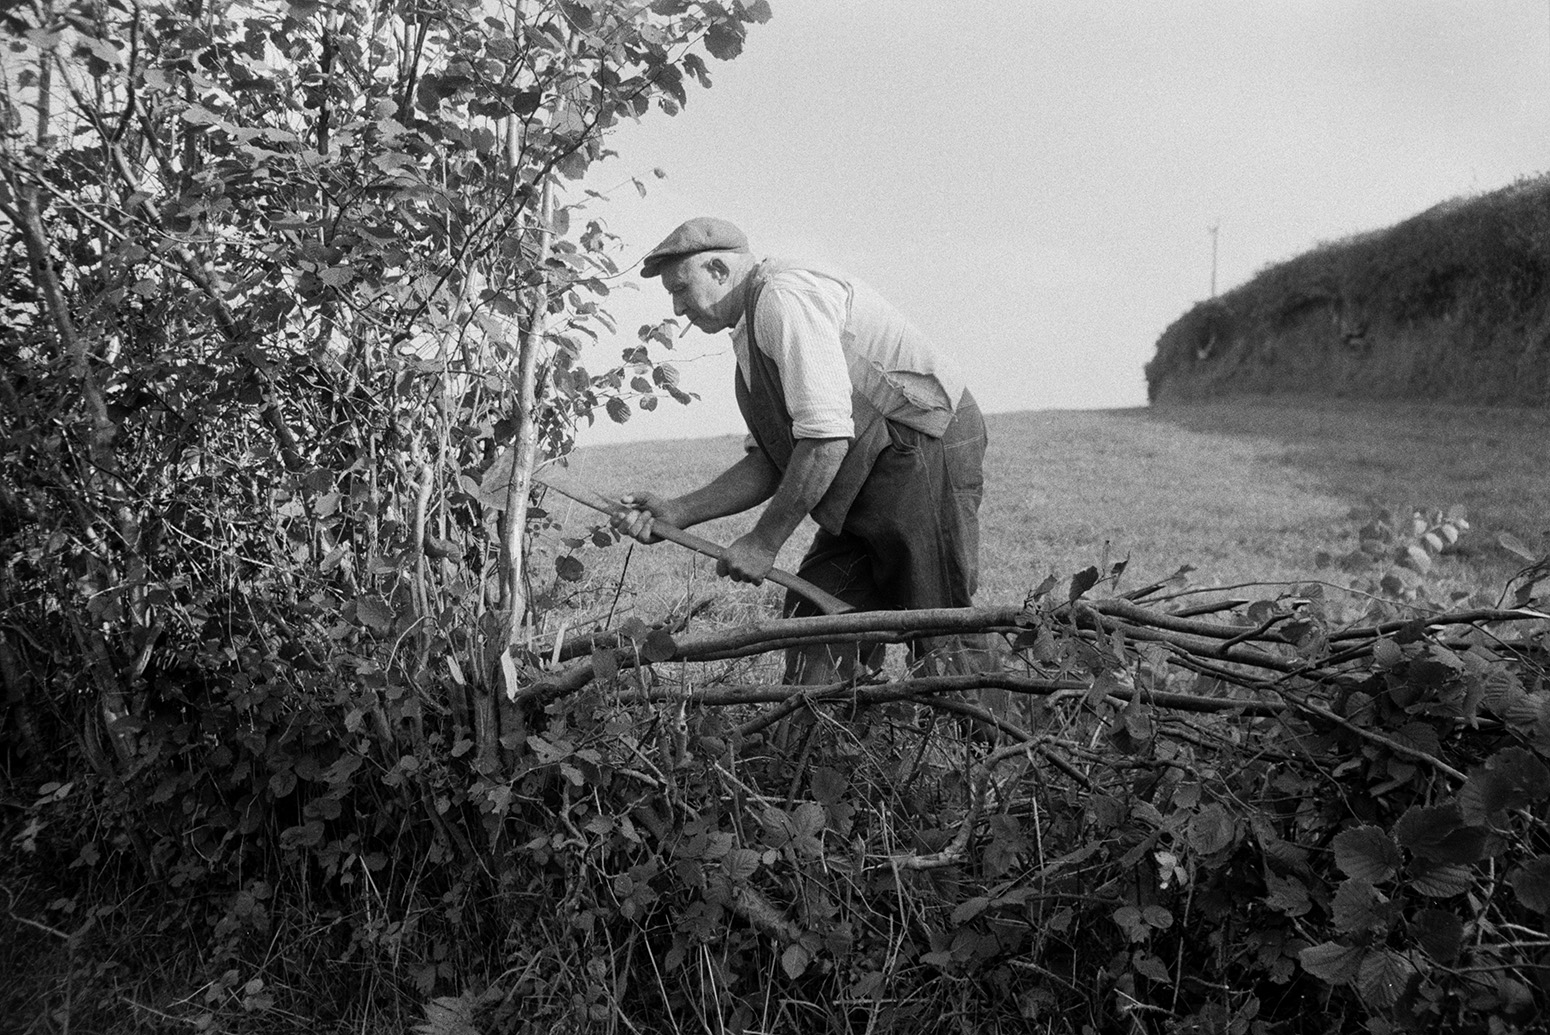 Tom Hooper laying a hedge in a field at Beaford. He is using an axe to cut the branches. He is also smoking a cigarette.